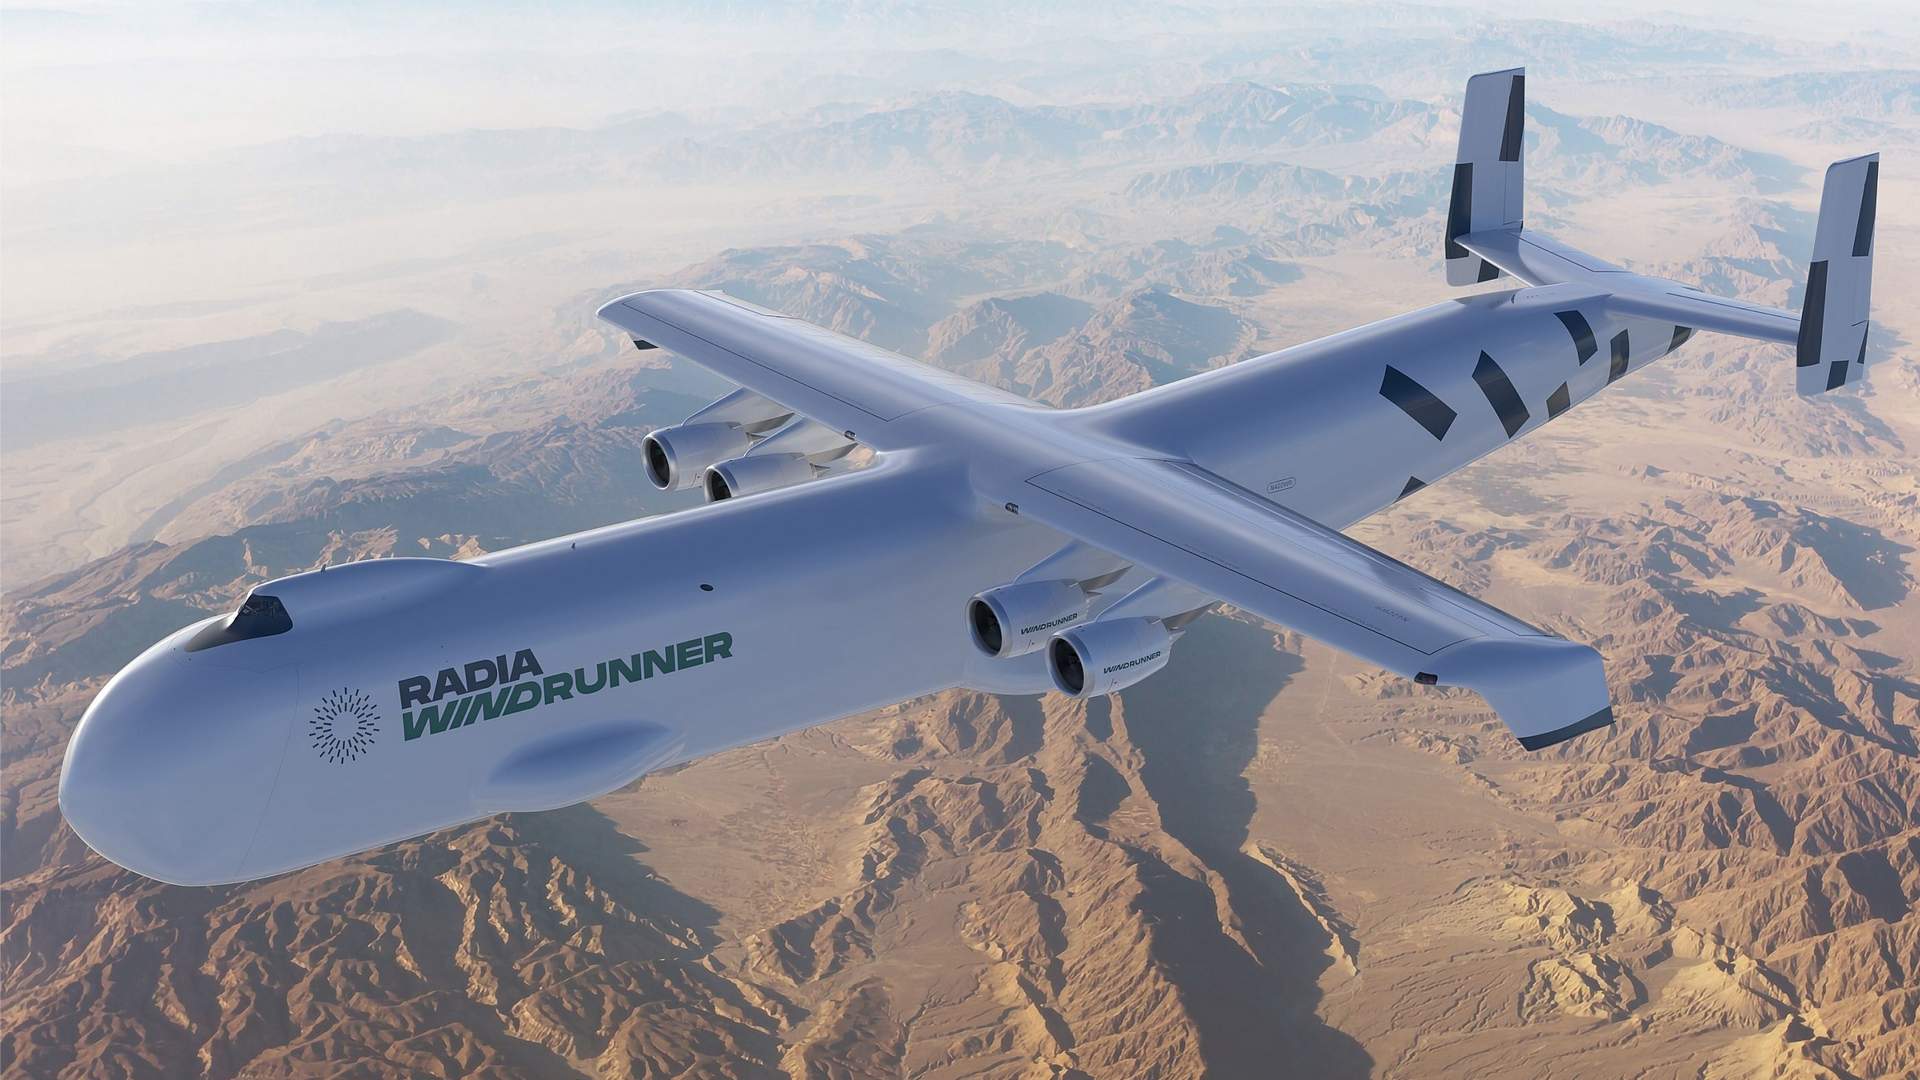 Radia WindRunner: The NEXT World’s Largest Aircraft?